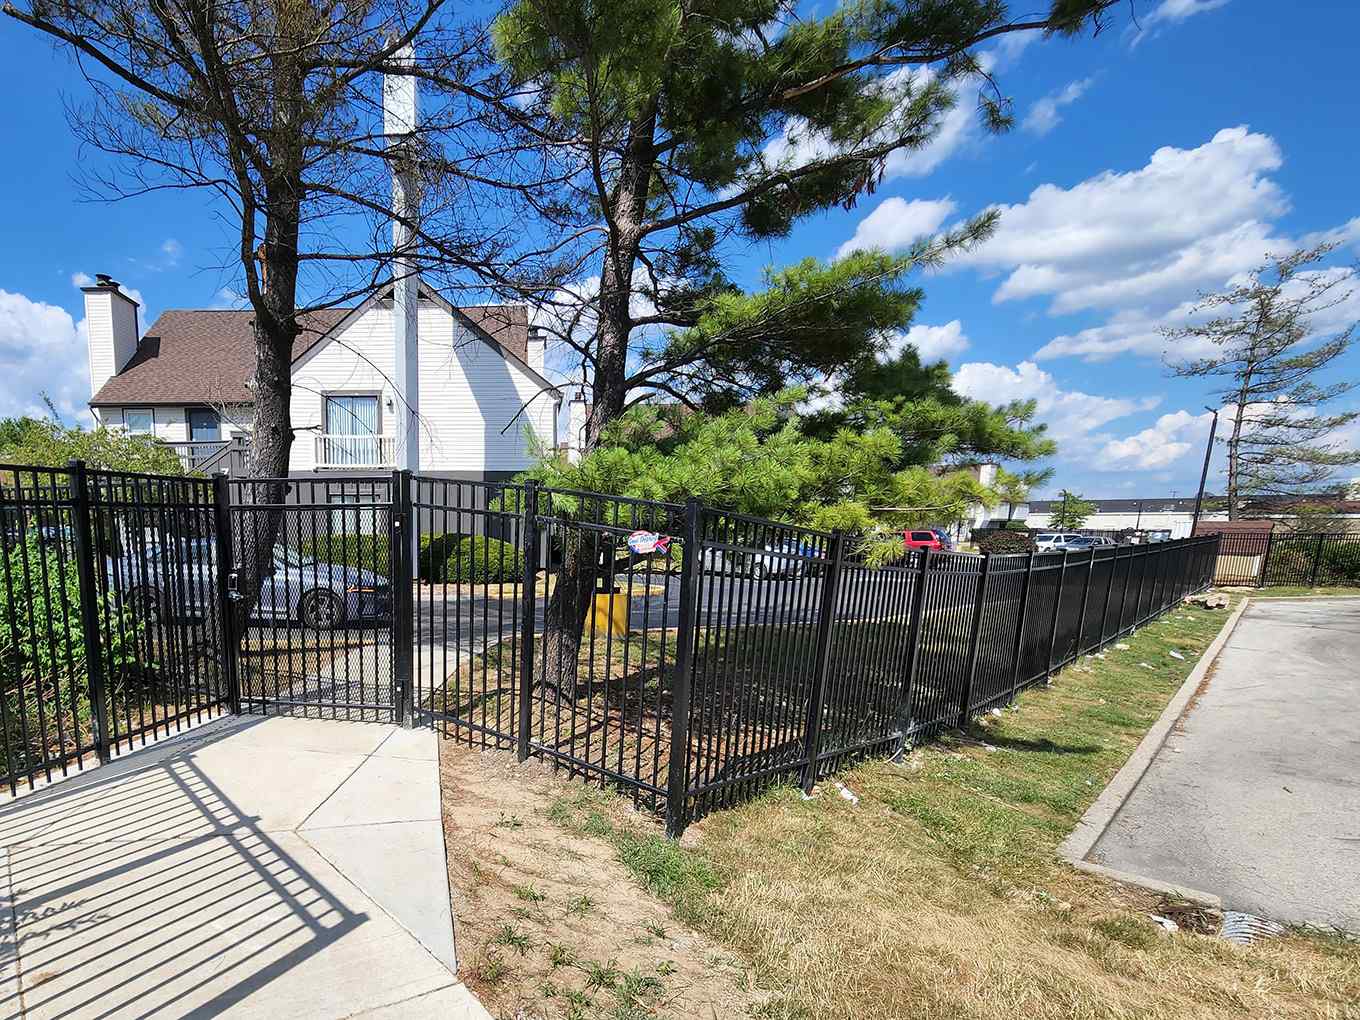 Commercial fence company in Indianapolis, Indiana